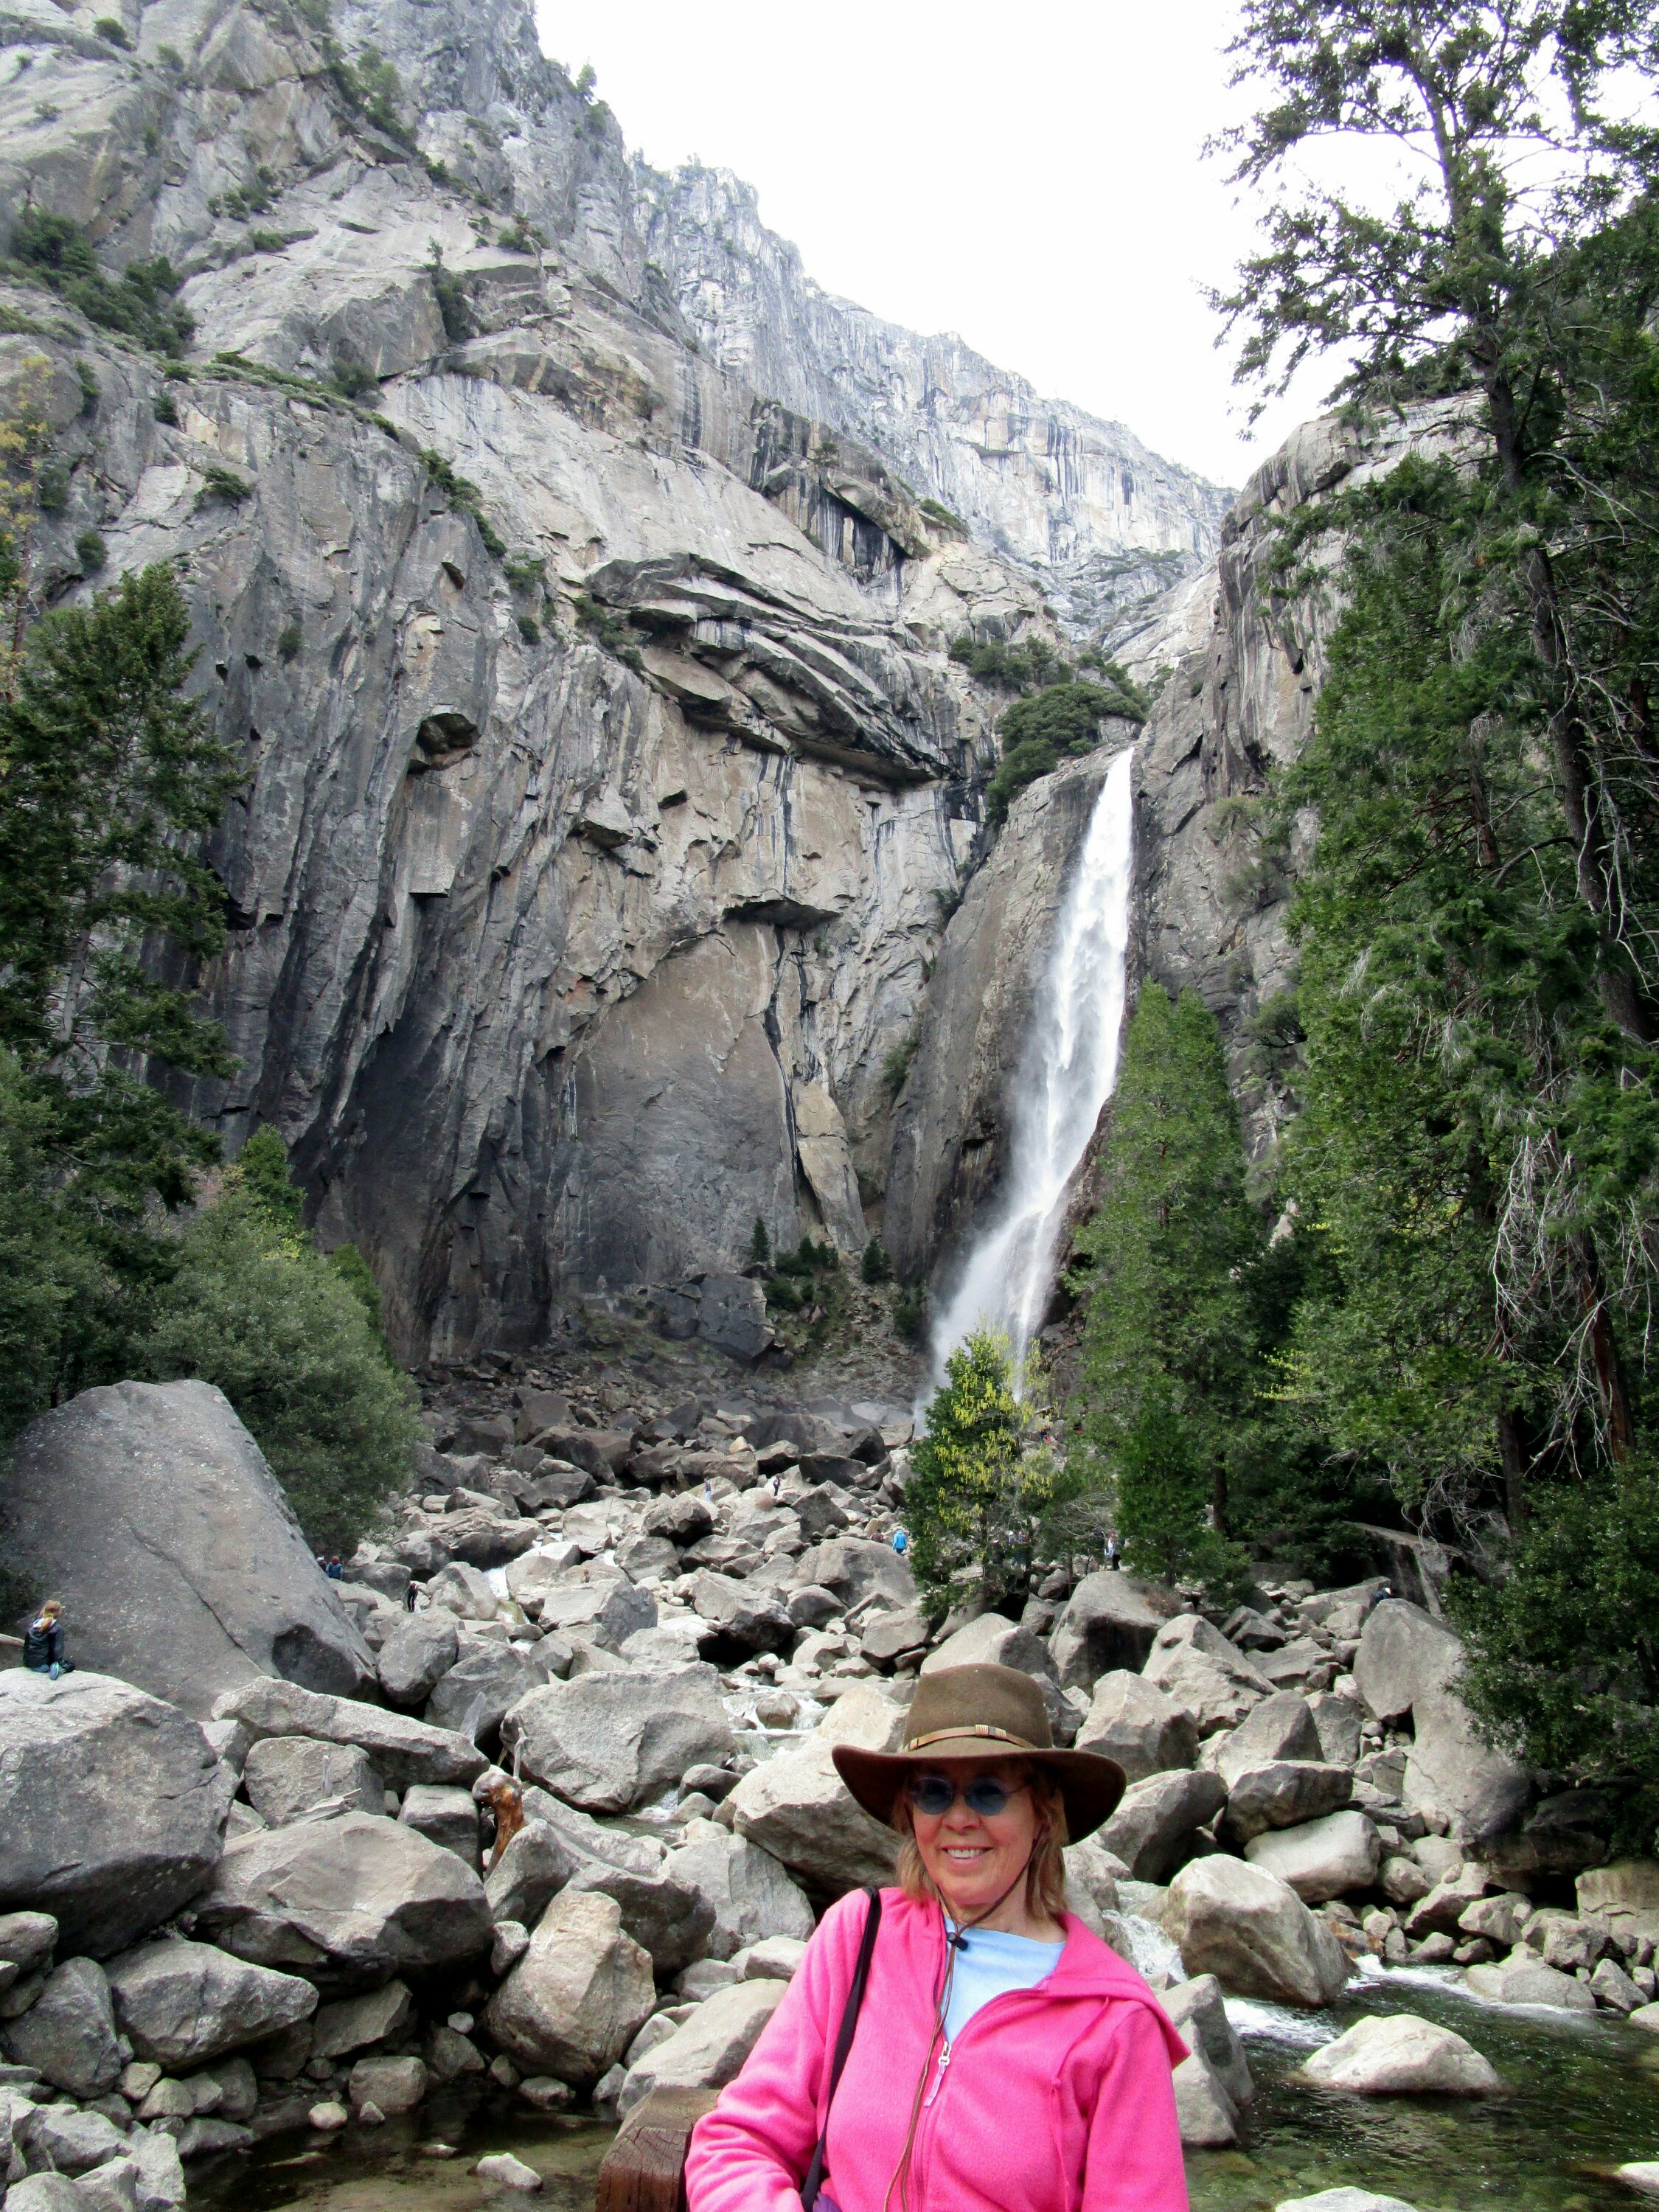 Dr. Renfrew is standing in front of deposited boulders at the base of Yosemite Falls.